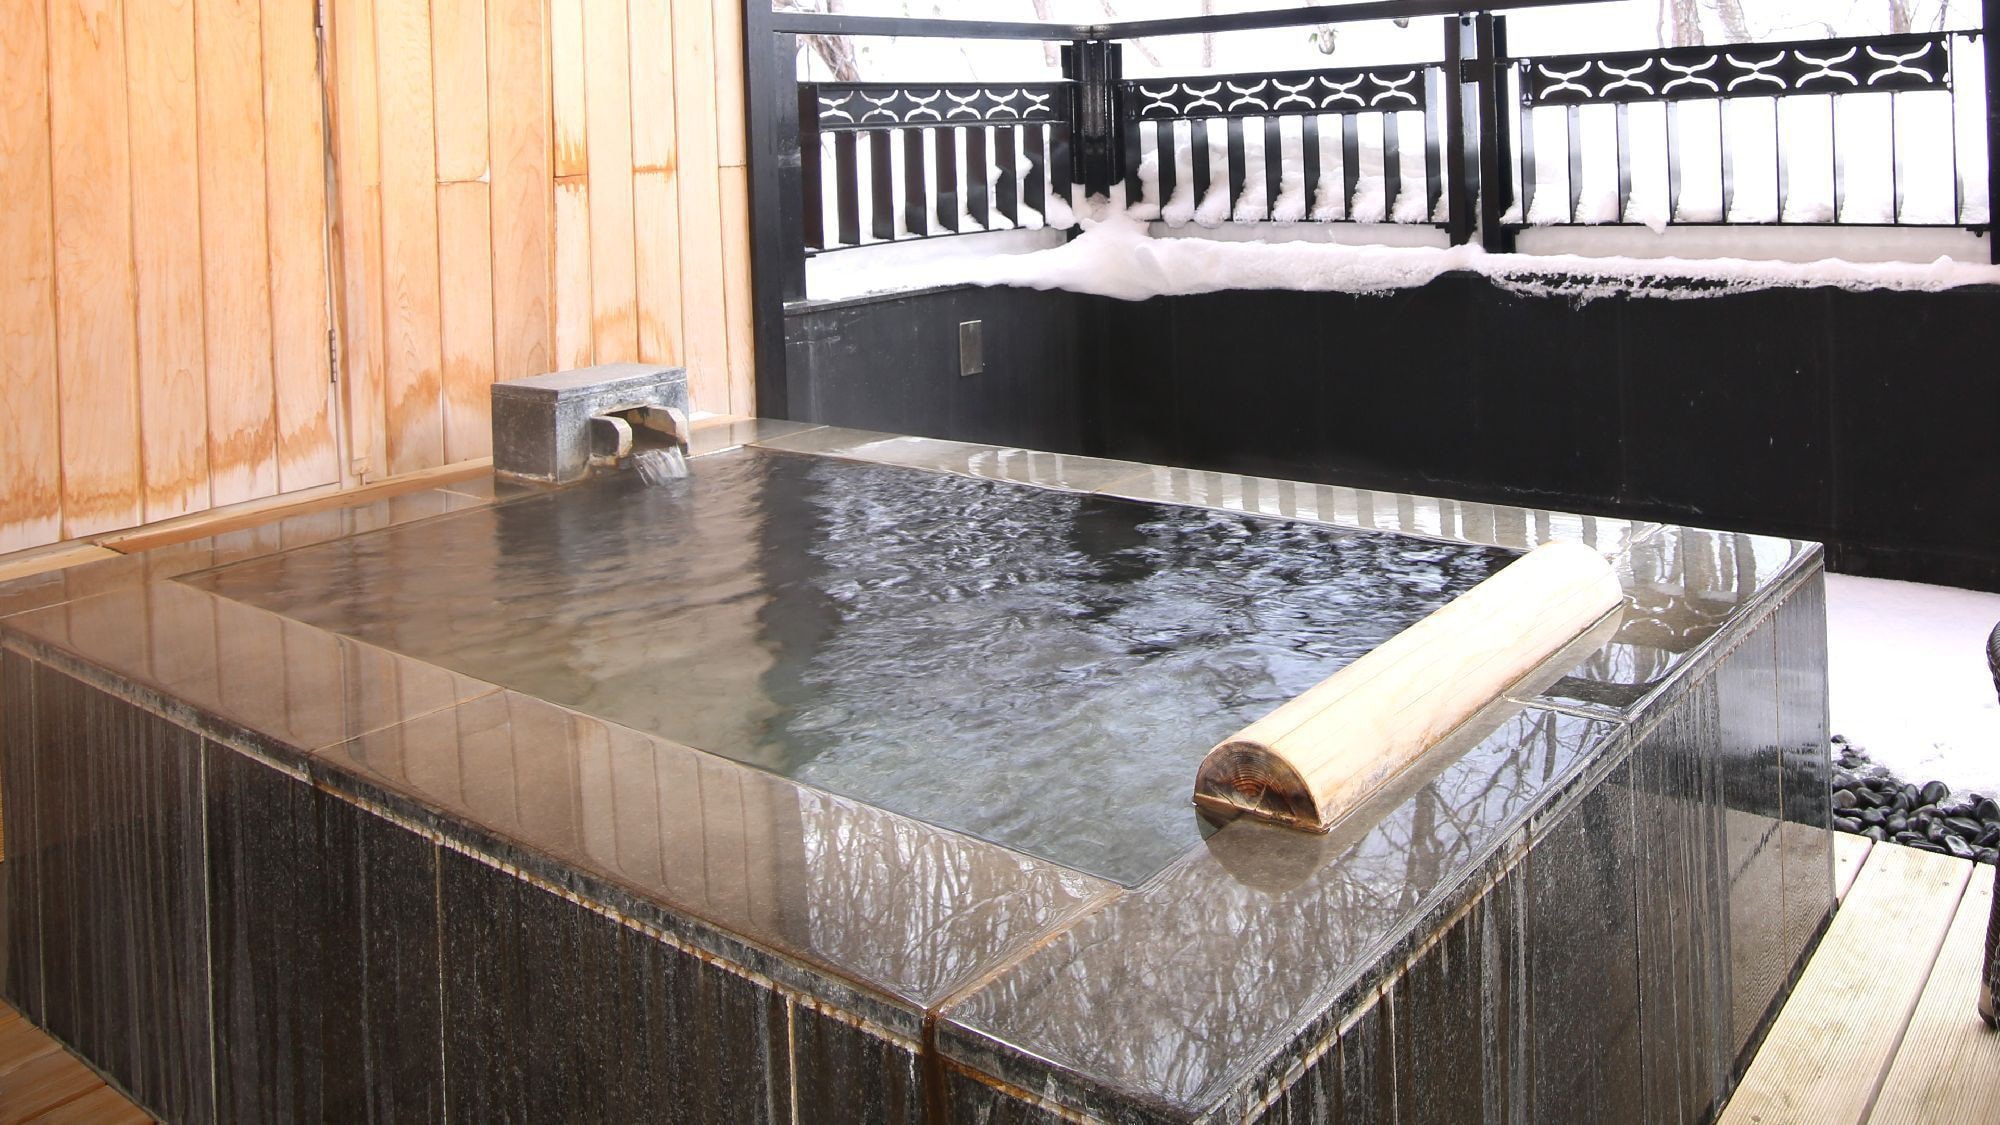 ◆ Suite with hot spring open-air bath for 2 people (example) / 52m2 suite recommended for couples and couples